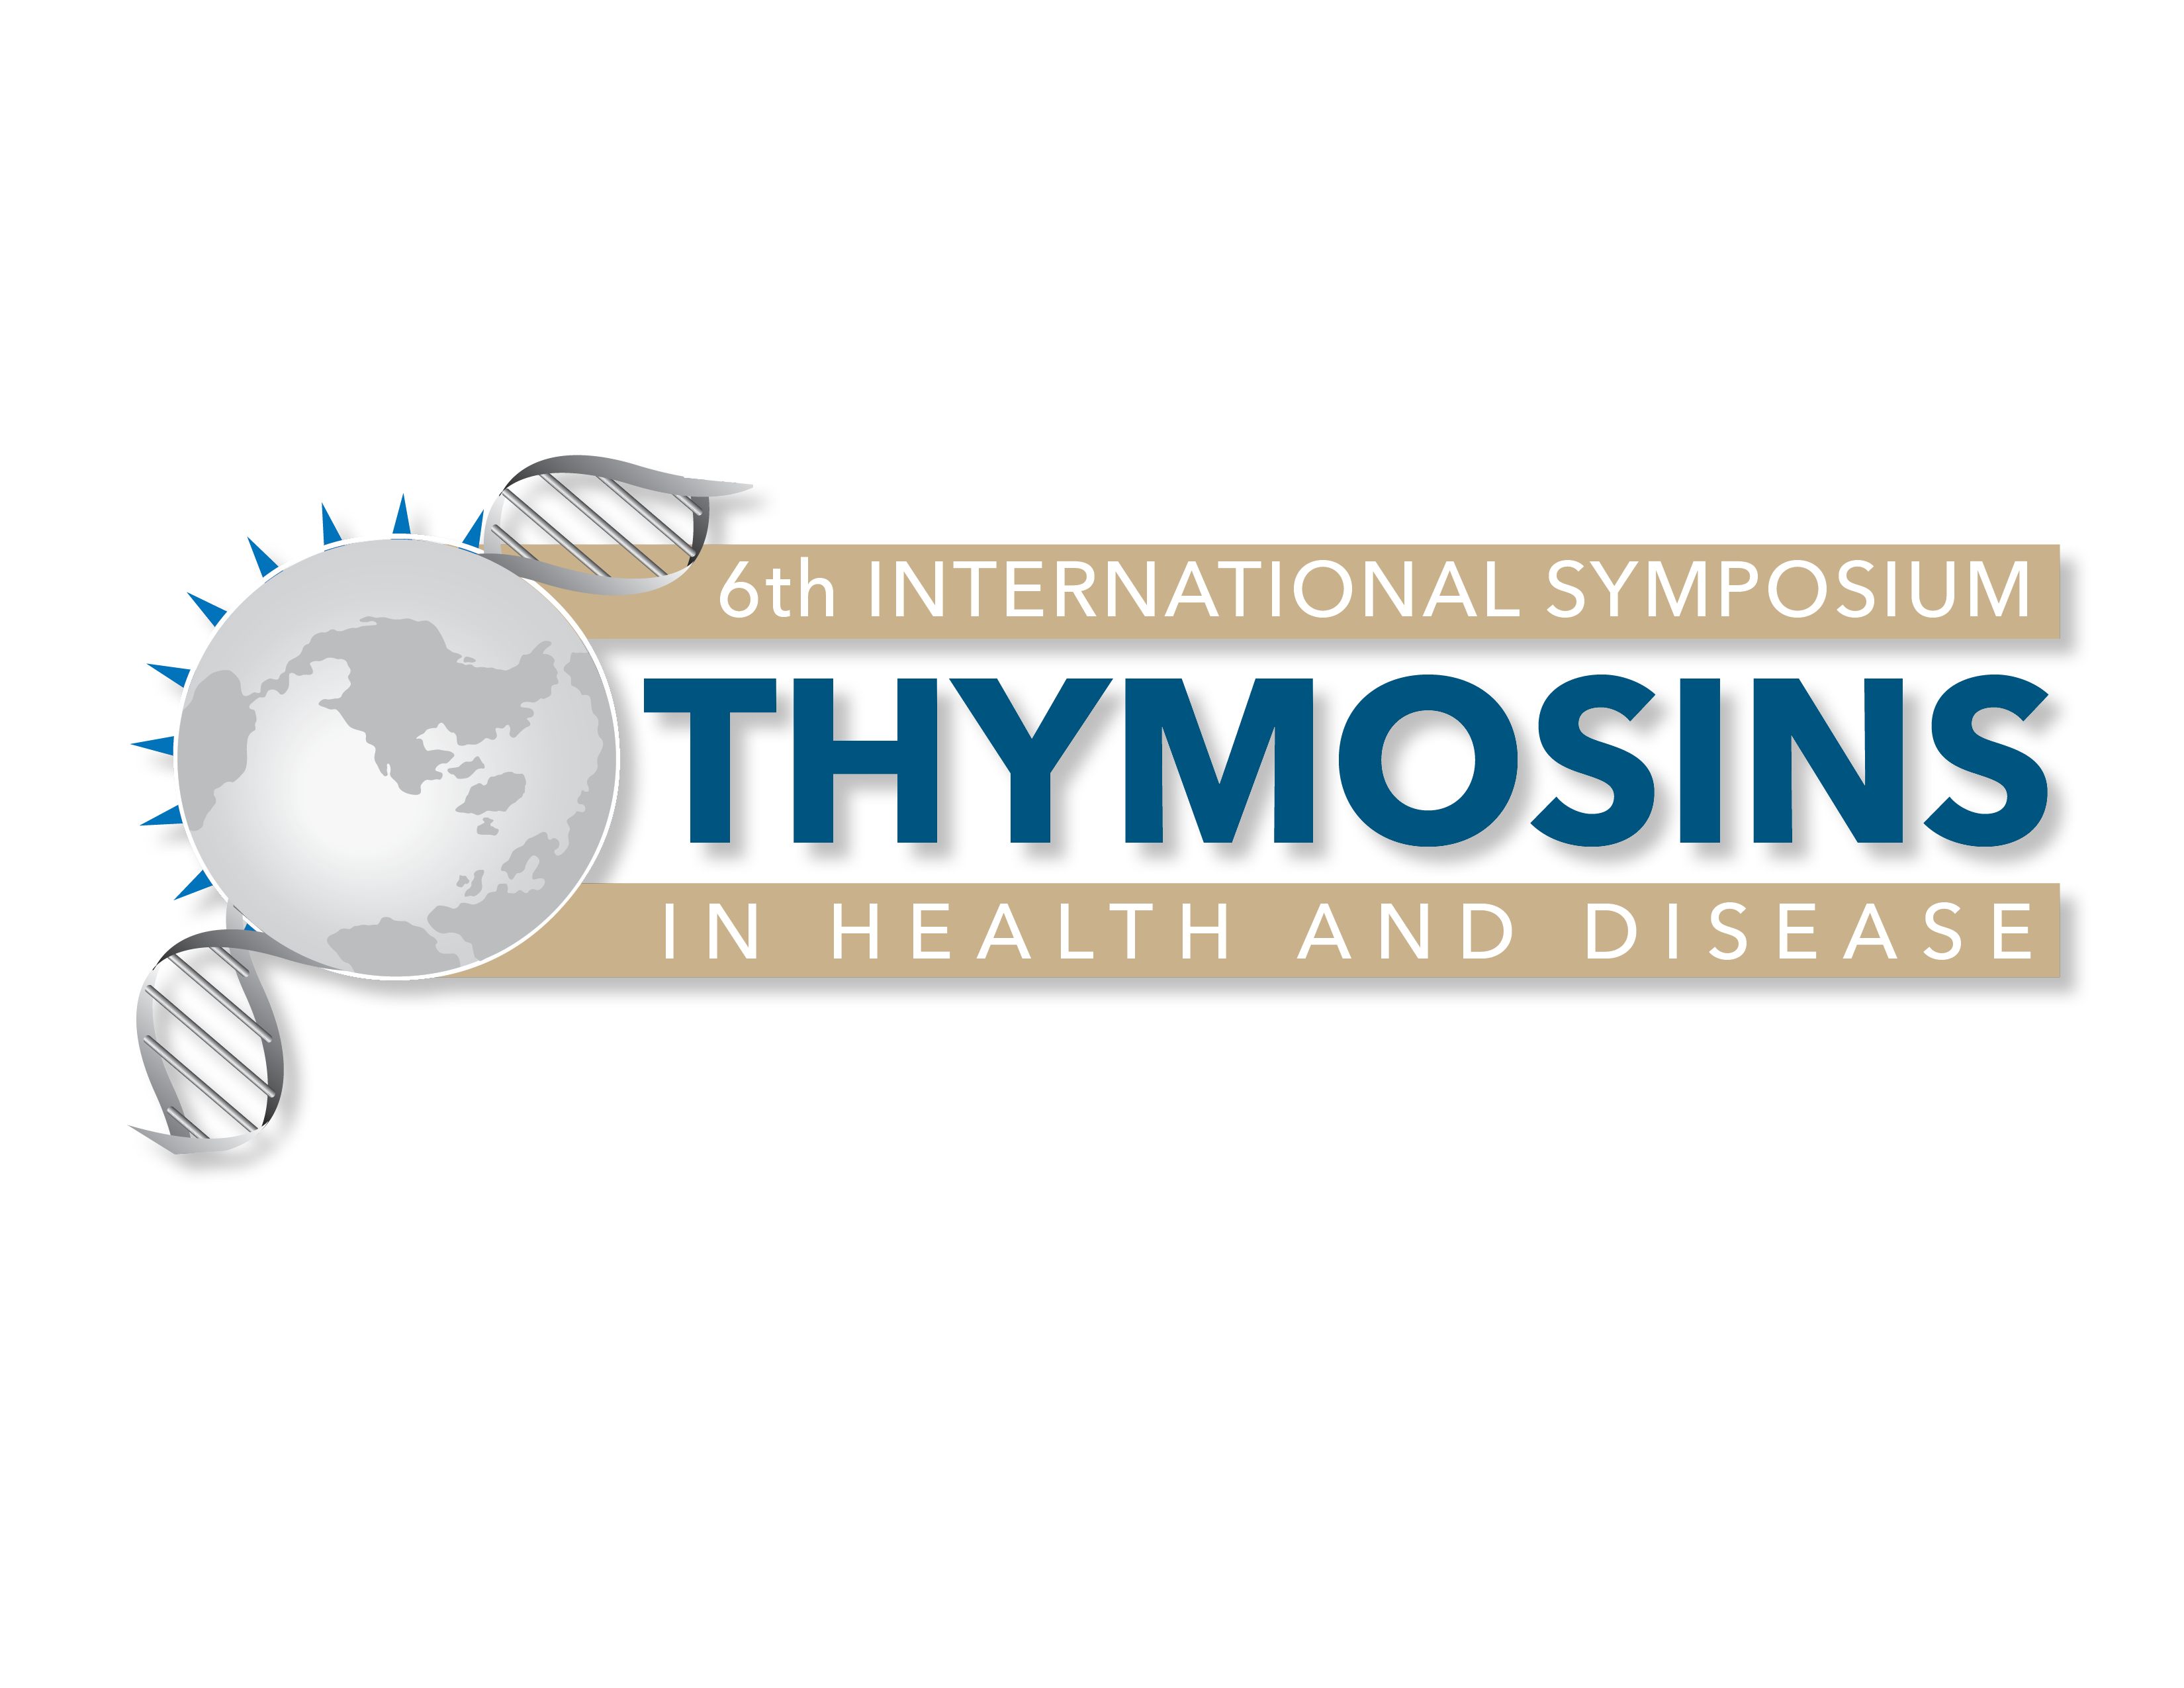 The 6th International Symposium on Thymosins in Health and Disease